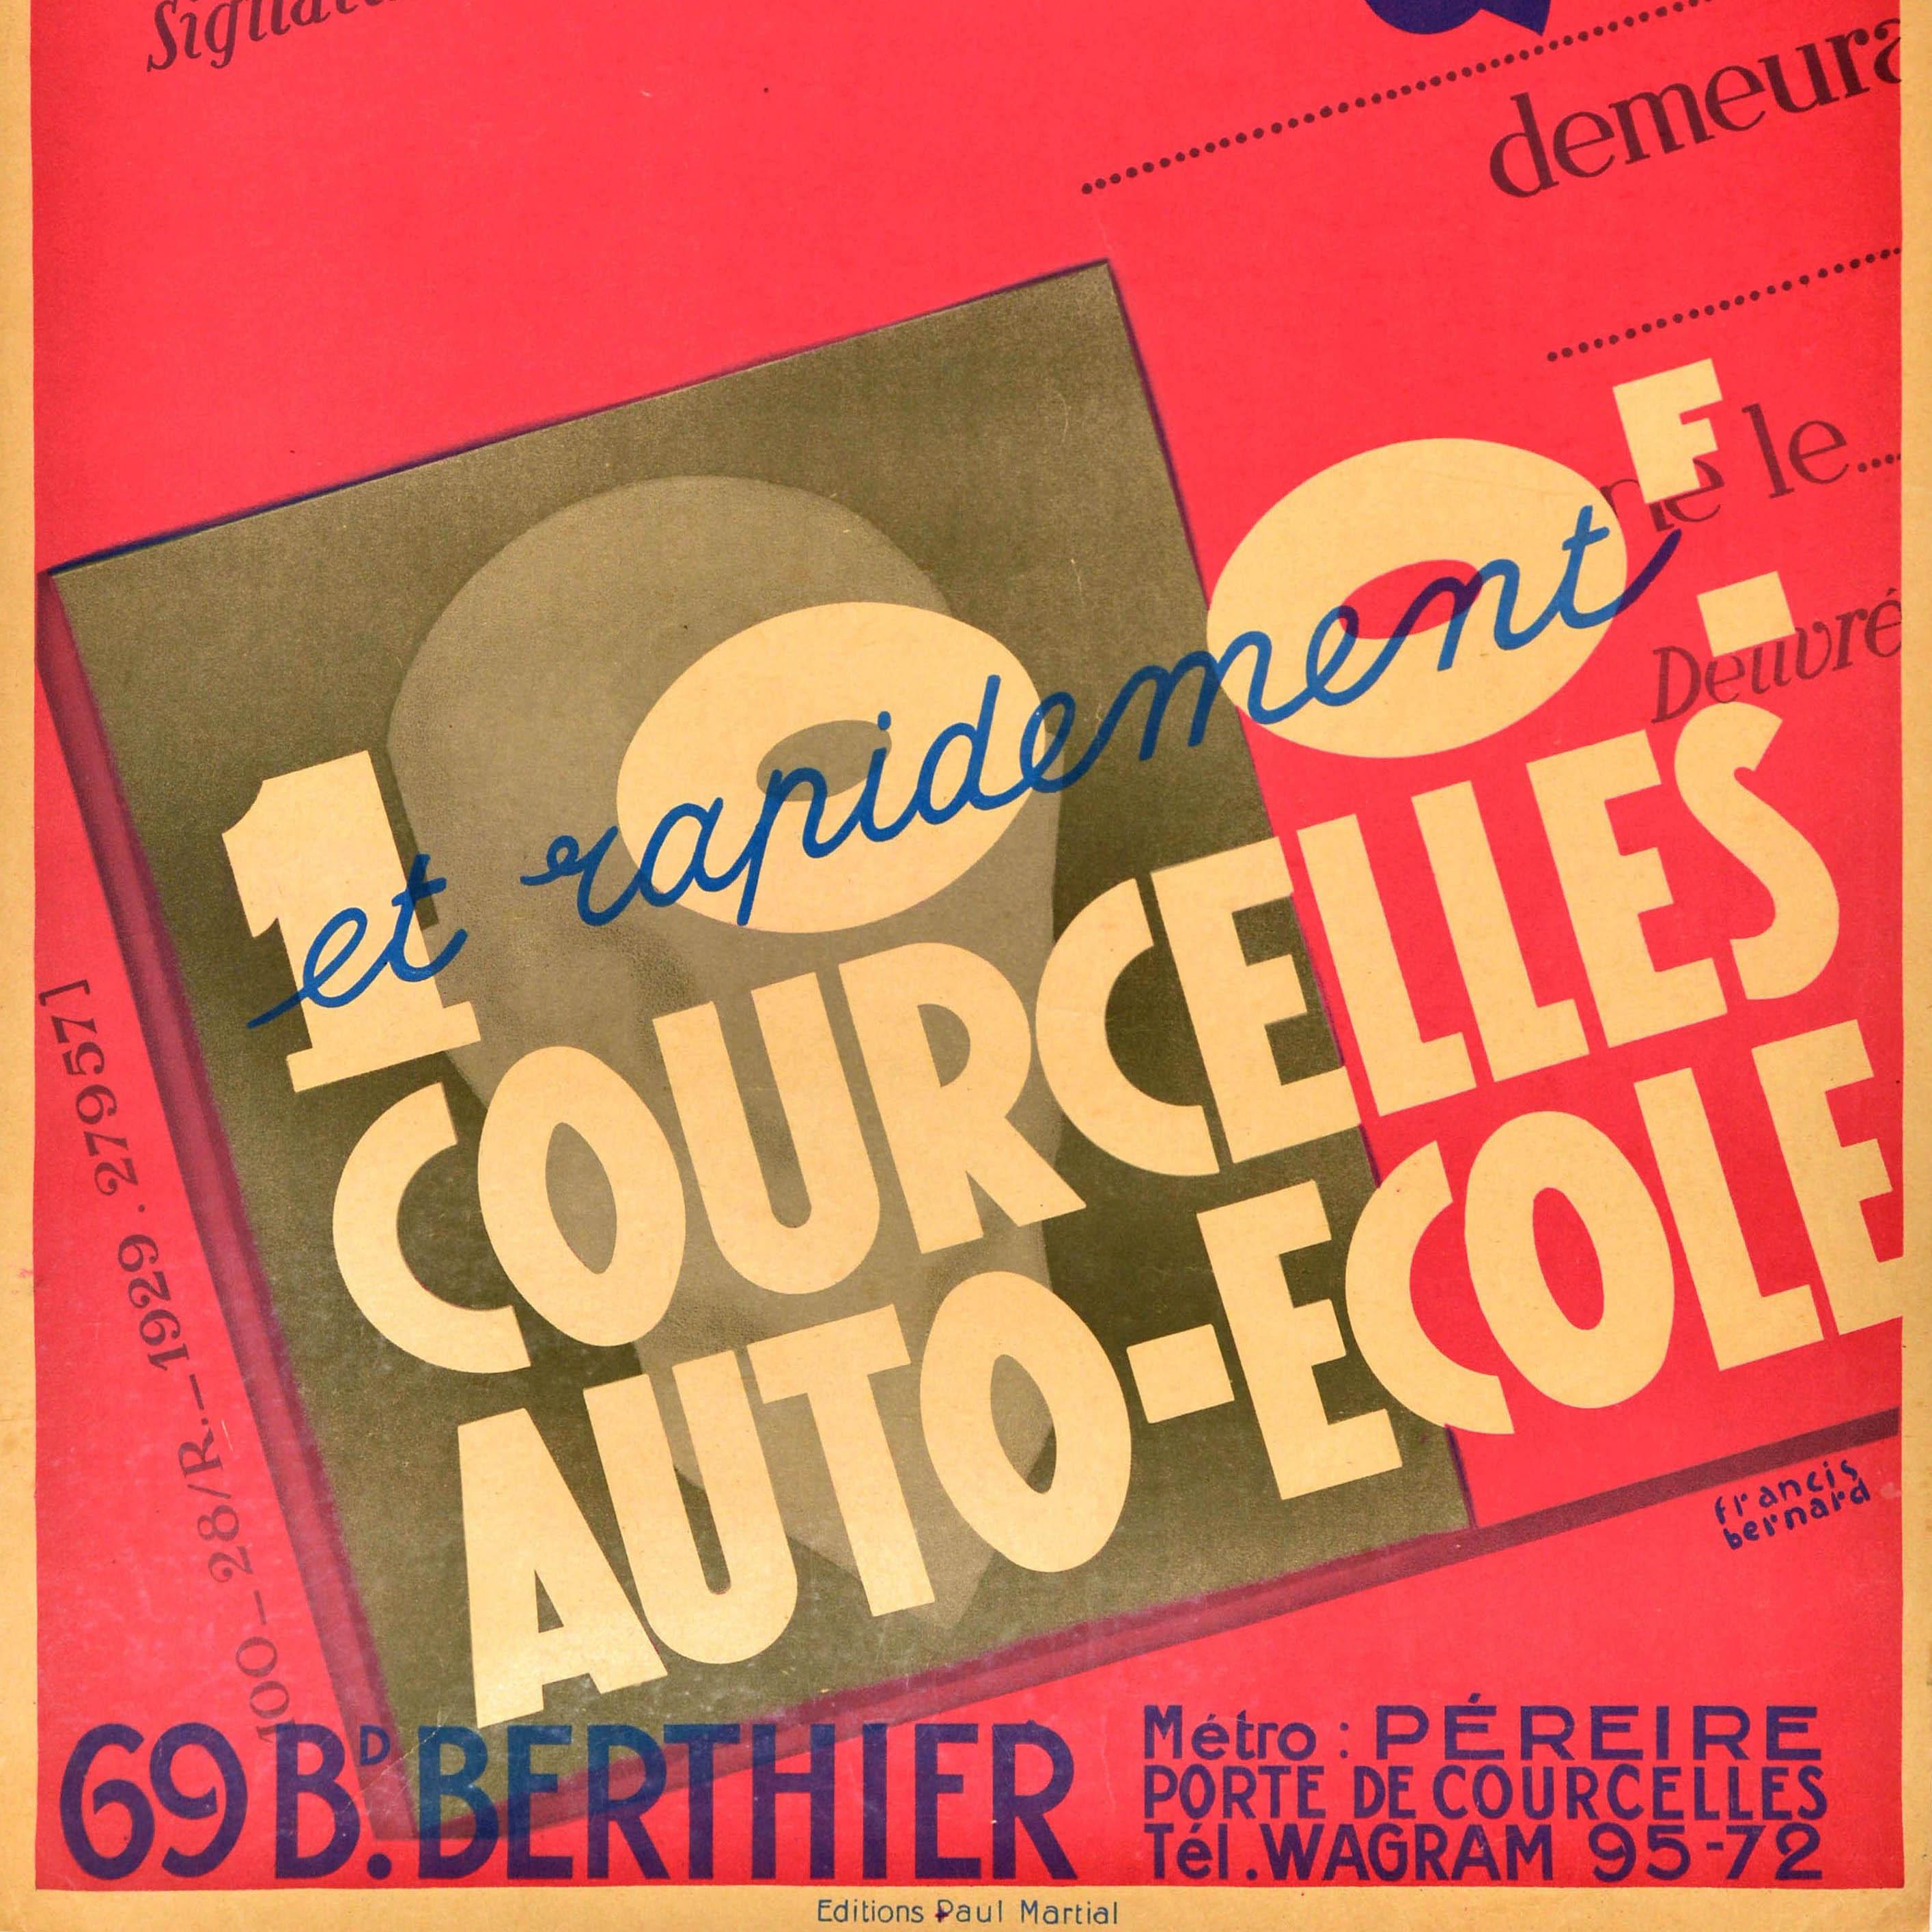 French Original Vintage Advertising Poster Driving School Courcelles Auto Ecole Design For Sale